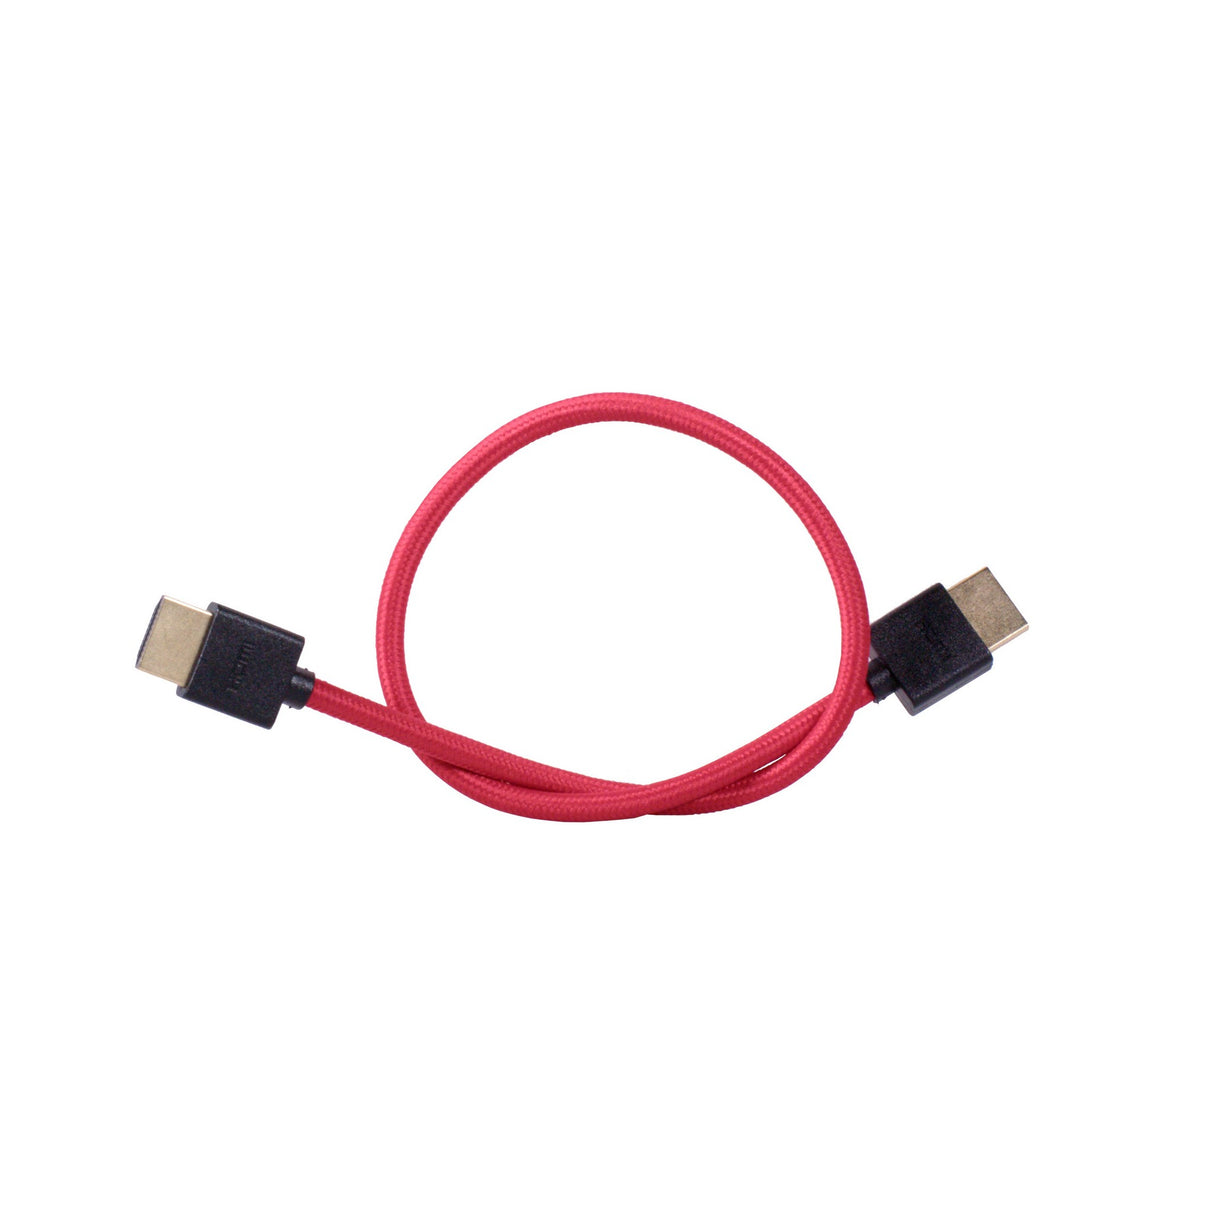 1SV HDMI Male to HDMI Male Thin Braided Cable, 16-Inches, Red